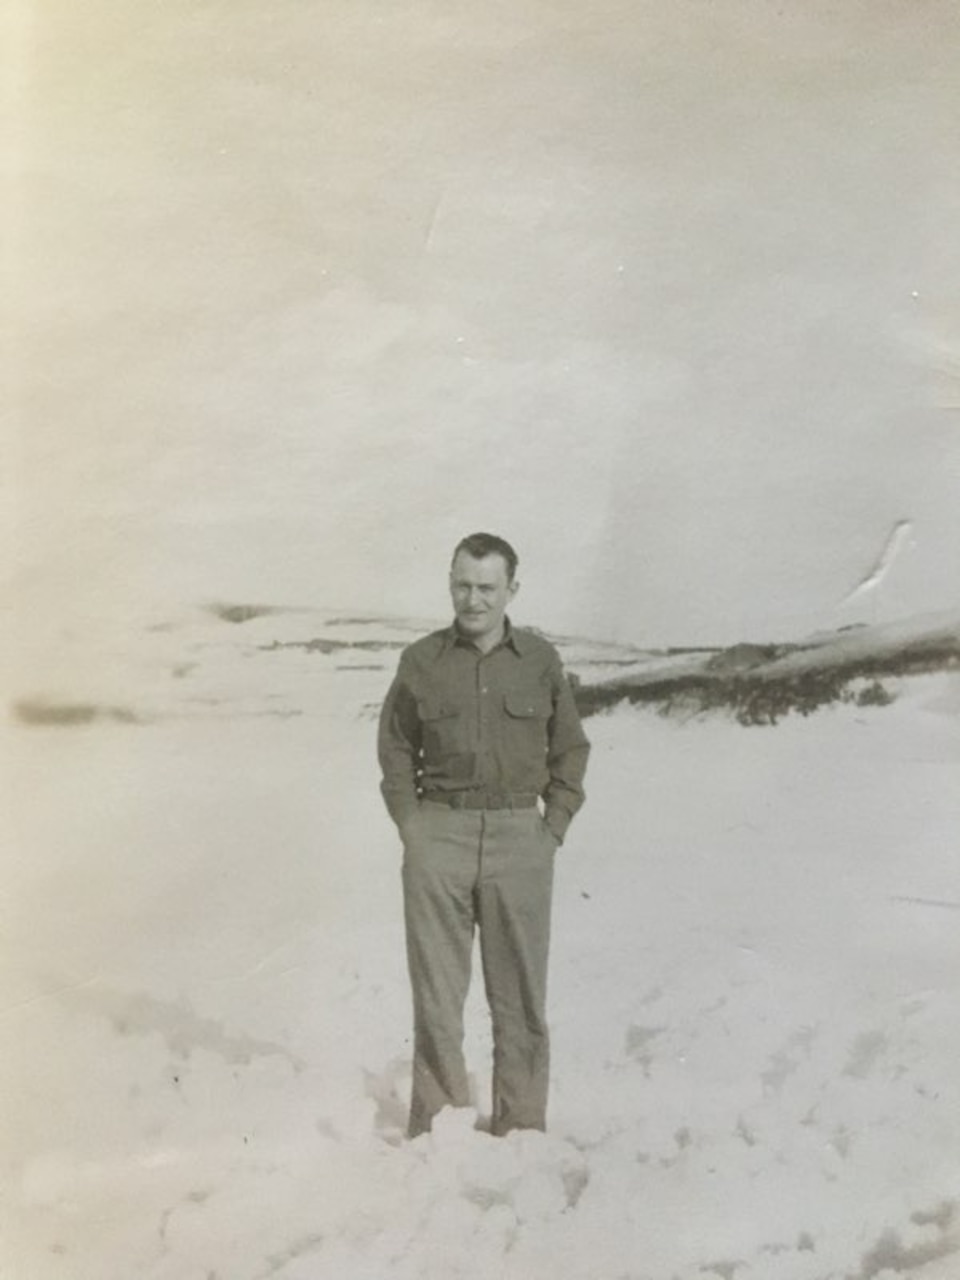 A man in an Army uniform stands outside in the snow.